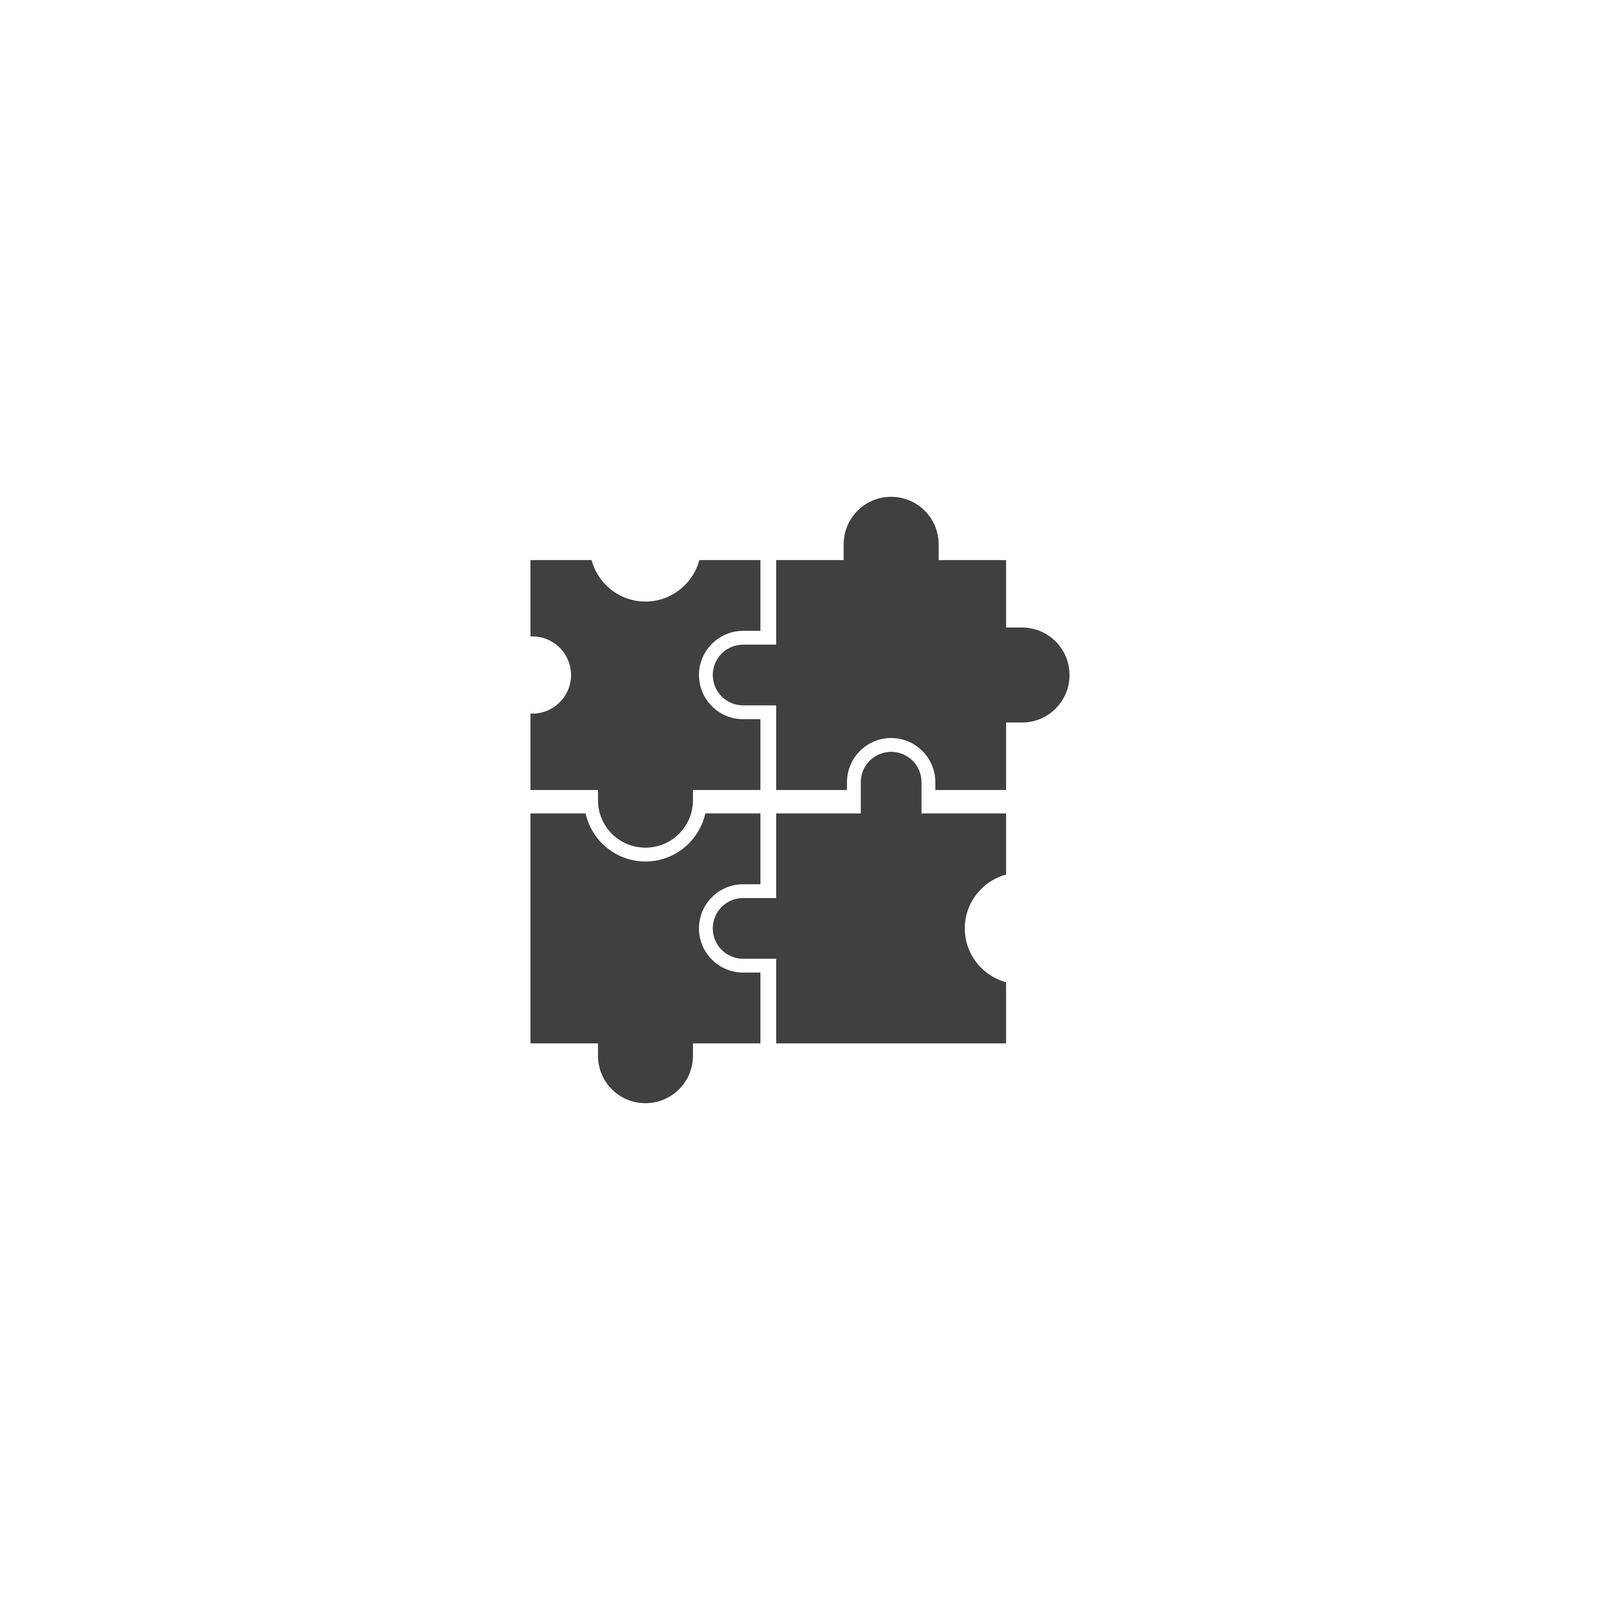 Puzzle icon by rnking